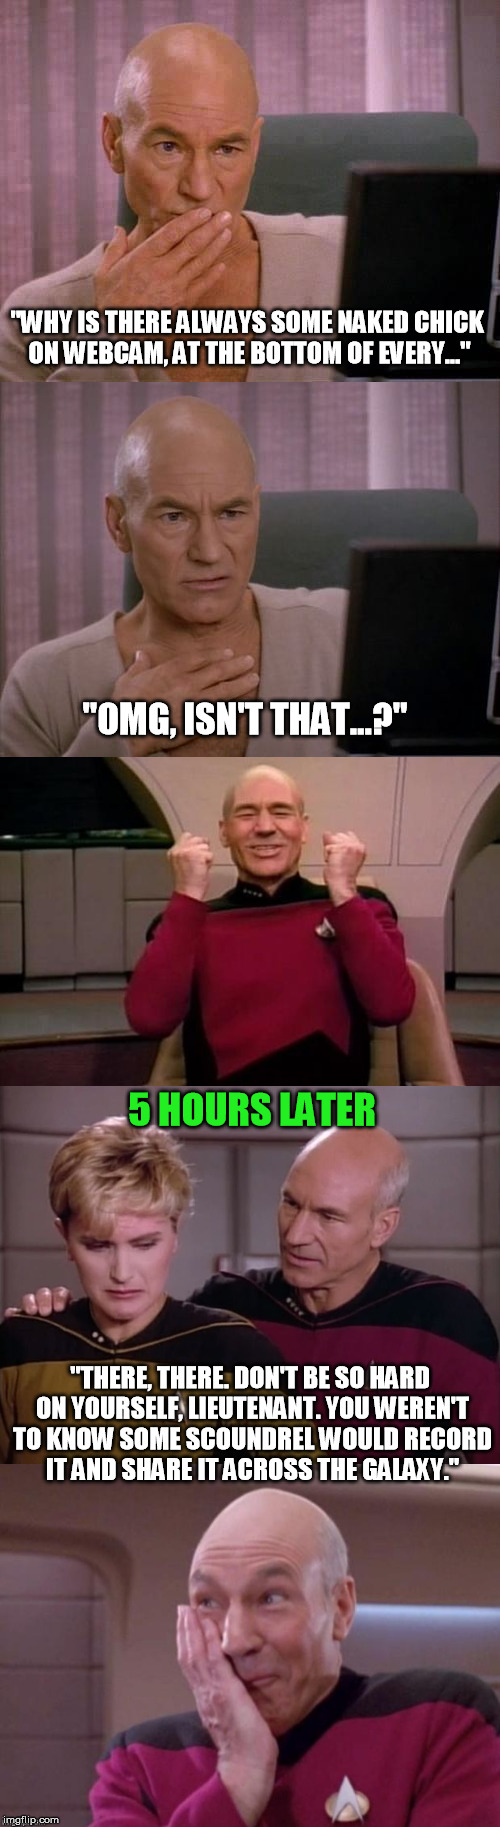 Bad Friend Picard | "WHY IS THERE ALWAYS SOME NAKED CHICK ON WEBCAM, AT THE BOTTOM OF EVERY..."; "OMG, ISN'T THAT...?"; 5 HOURS LATER; "THERE, THERE. DON'T BE SO HARD ON YOURSELF, LIEUTENANT. YOU WEREN'T TO KNOW SOME SCOUNDREL WOULD RECORD IT AND SHARE IT ACROSS THE GALAXY." | image tagged in meme,webcam,picard | made w/ Imgflip meme maker